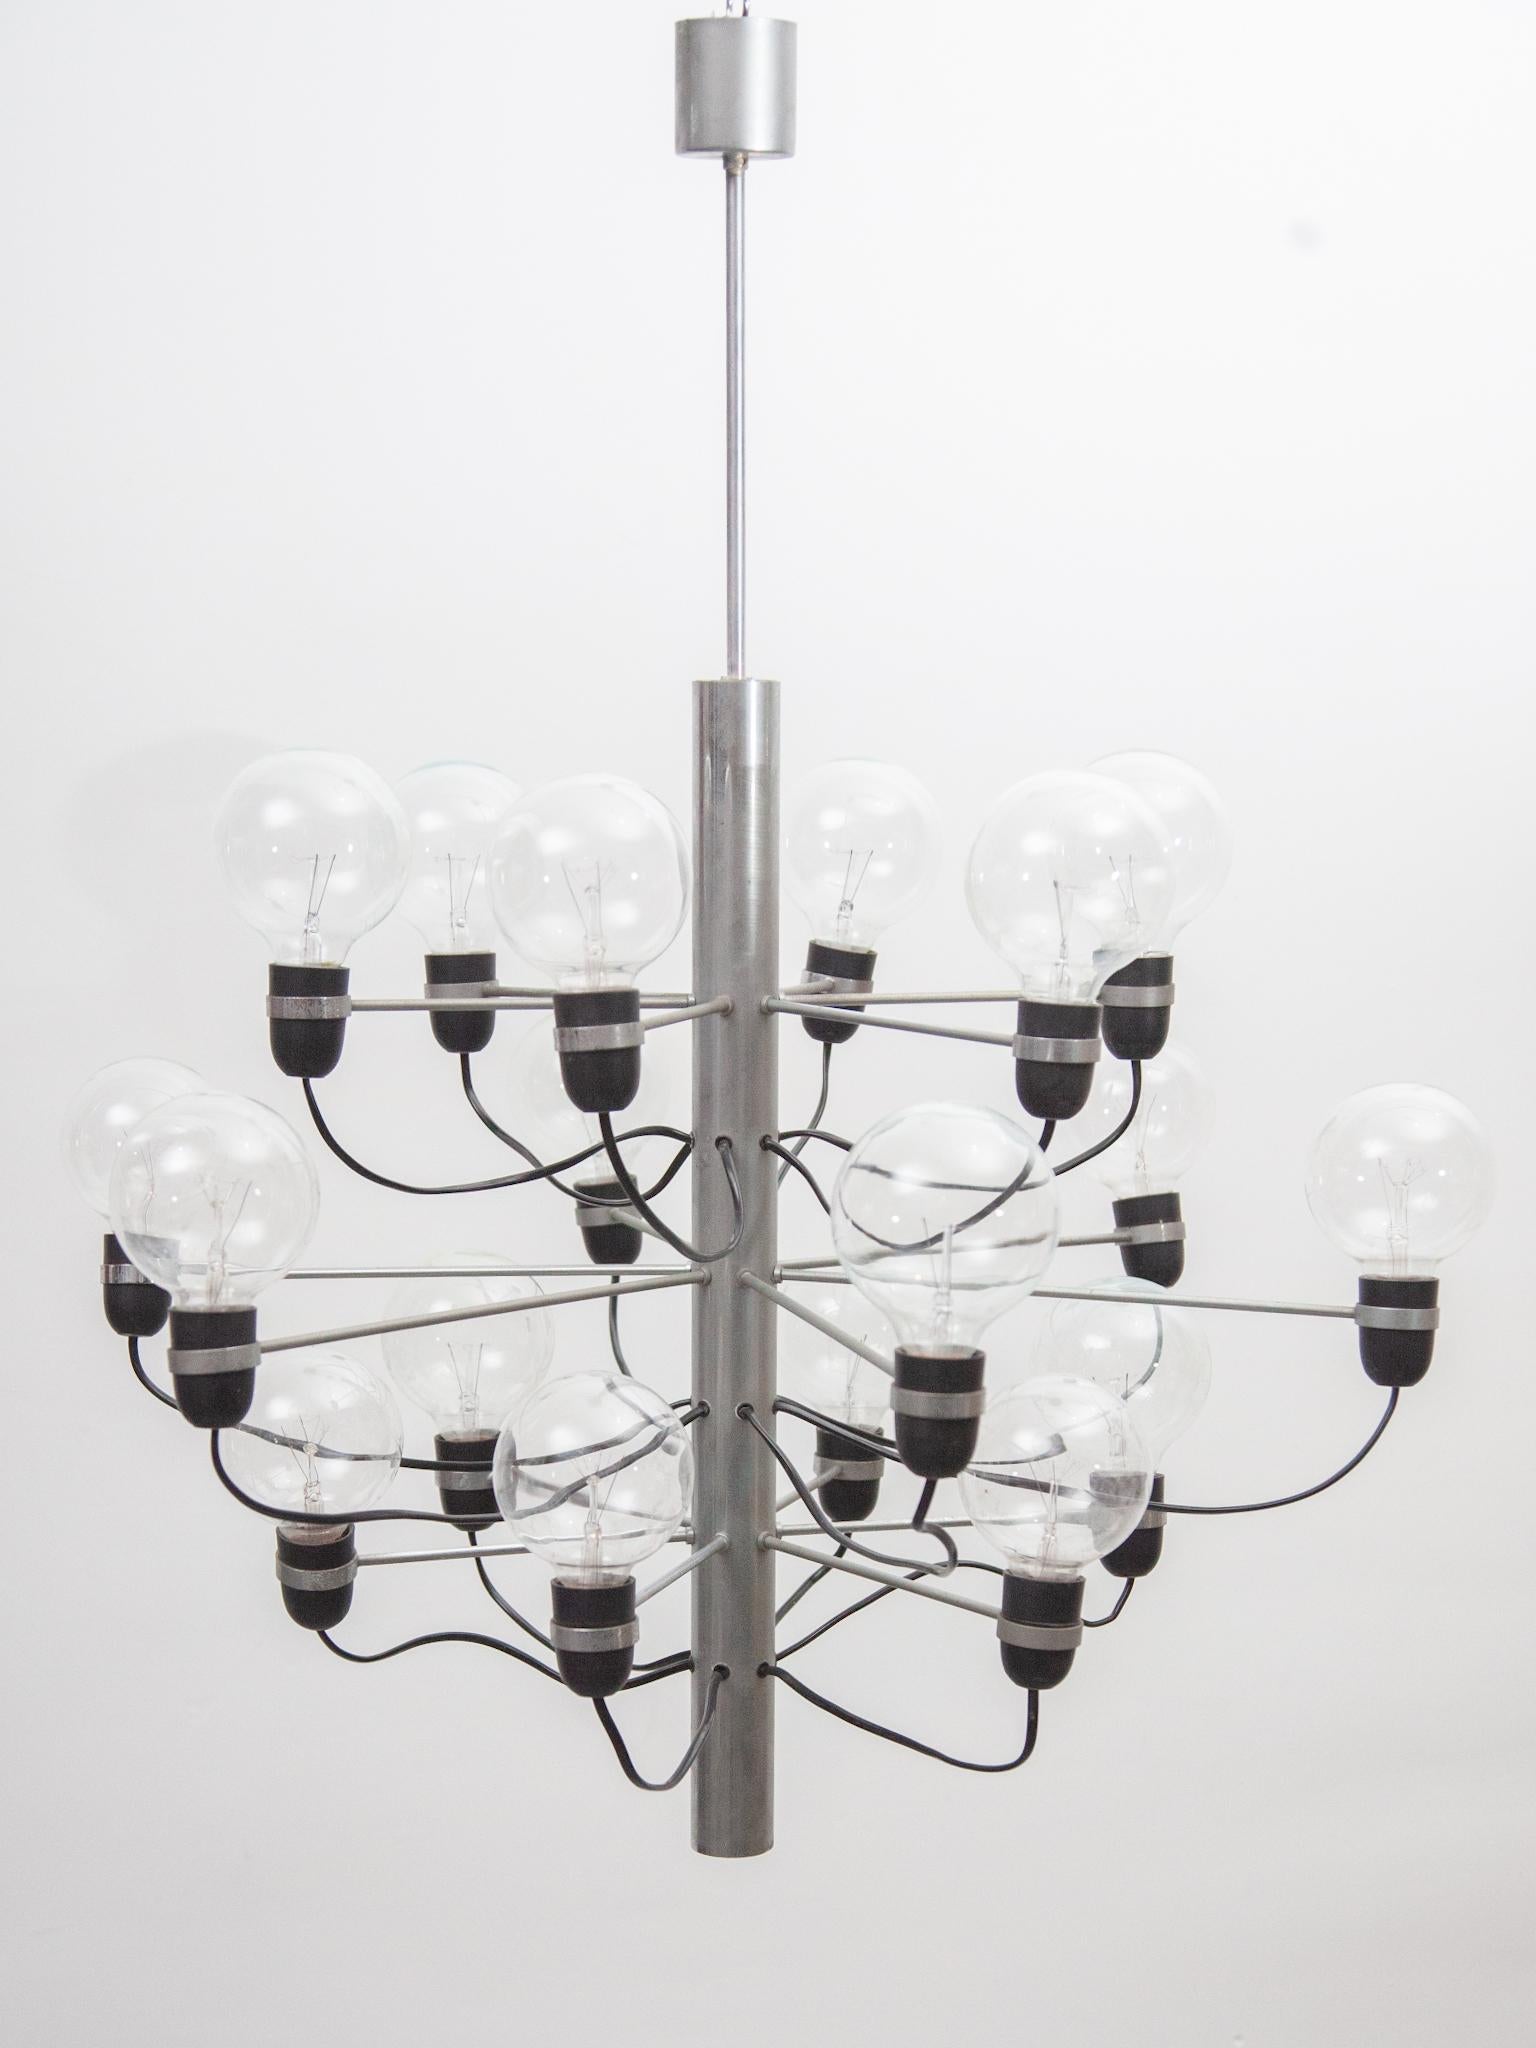 The chrome chandelier designed by Gino Sarfatti for Flos 1980s. This design contains 18 bulbs and has a chrome base and bakelite holders. The chandelier contains in good original condition.